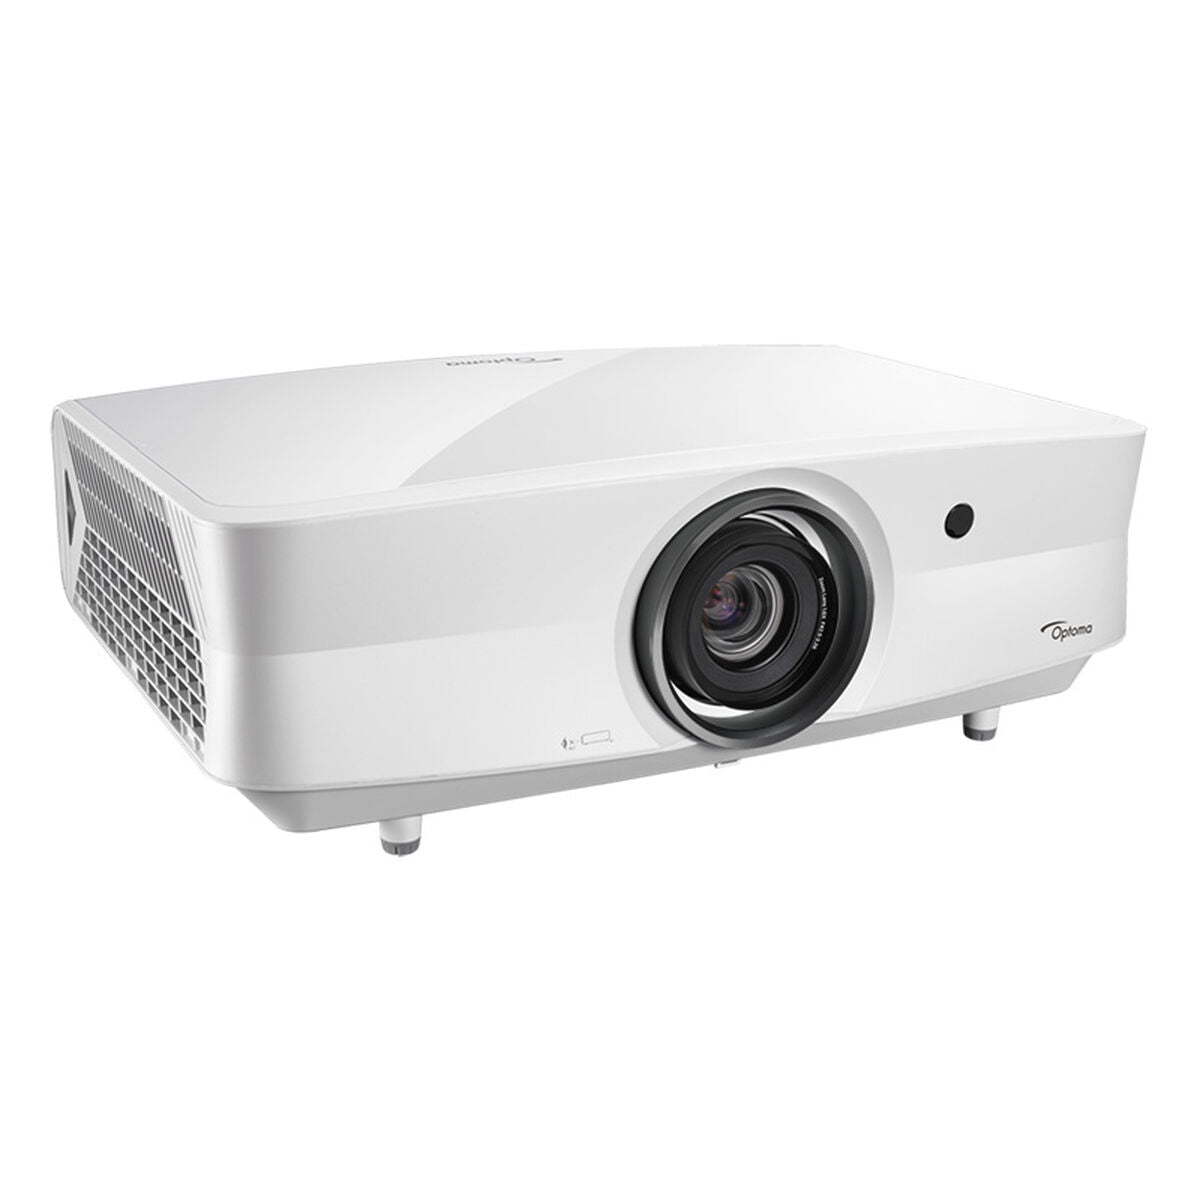 Projector Optoma E1P1A3LWE1Z1 4K Ultra HD 5000 Lm, Optoma, Electronics, Photography and video cameras, projector-optoma-e1p1a3lwe1z1-4k-ultra-hd-5000-lm, :Ultra HD, Brand_Optoma, category-reference-2609, category-reference-2642, category-reference-2947, category-reference-t-19653, category-reference-t-8122, computers / peripherals, Condition_NEW, entertainment, fotografía, office, Price_+ 1000, RiotNook